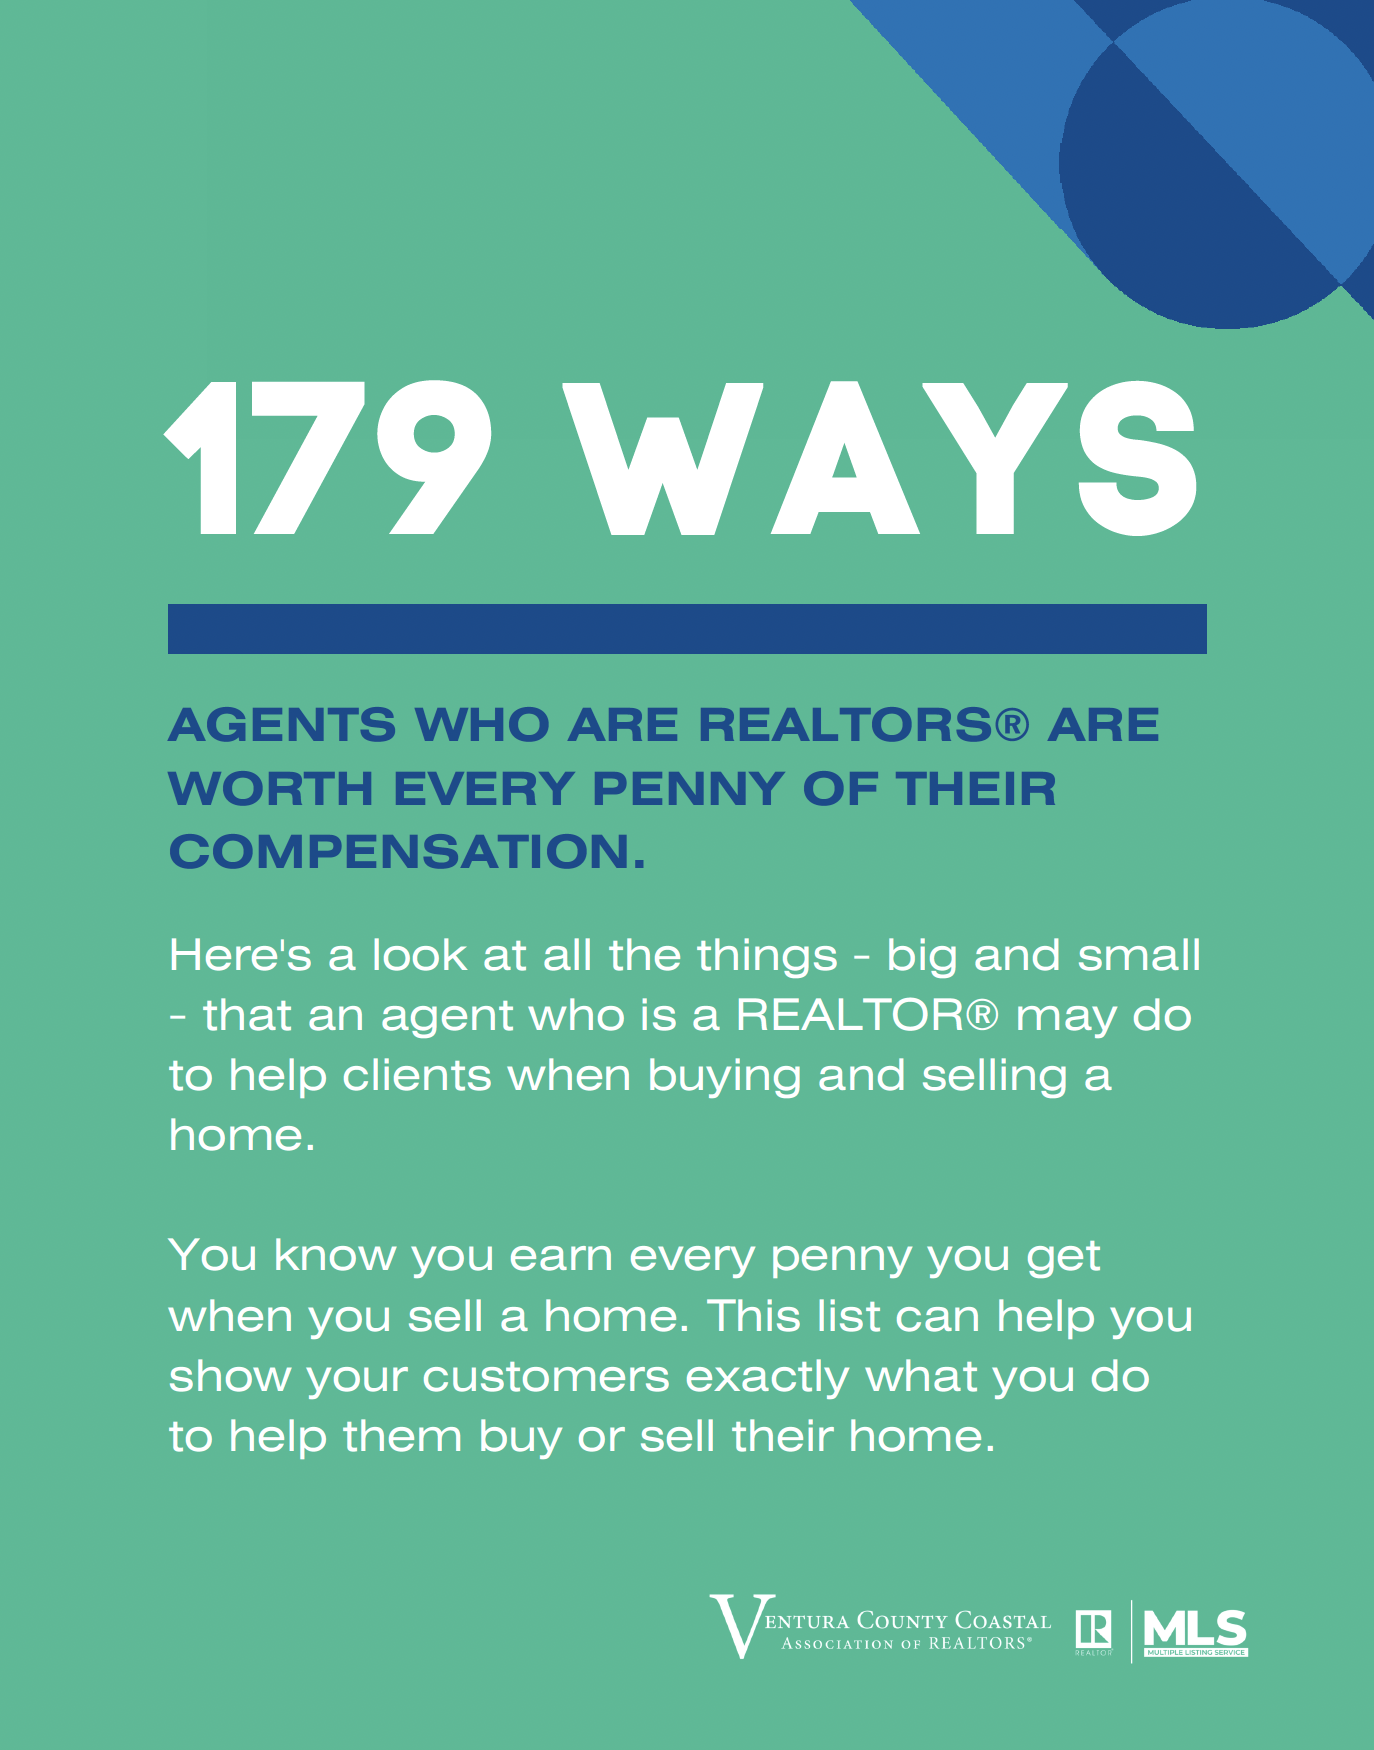 AGENTS WHO ARE REALTORS® ARE WORTH EVERY PENNY OF THEIR COMPENSATION.